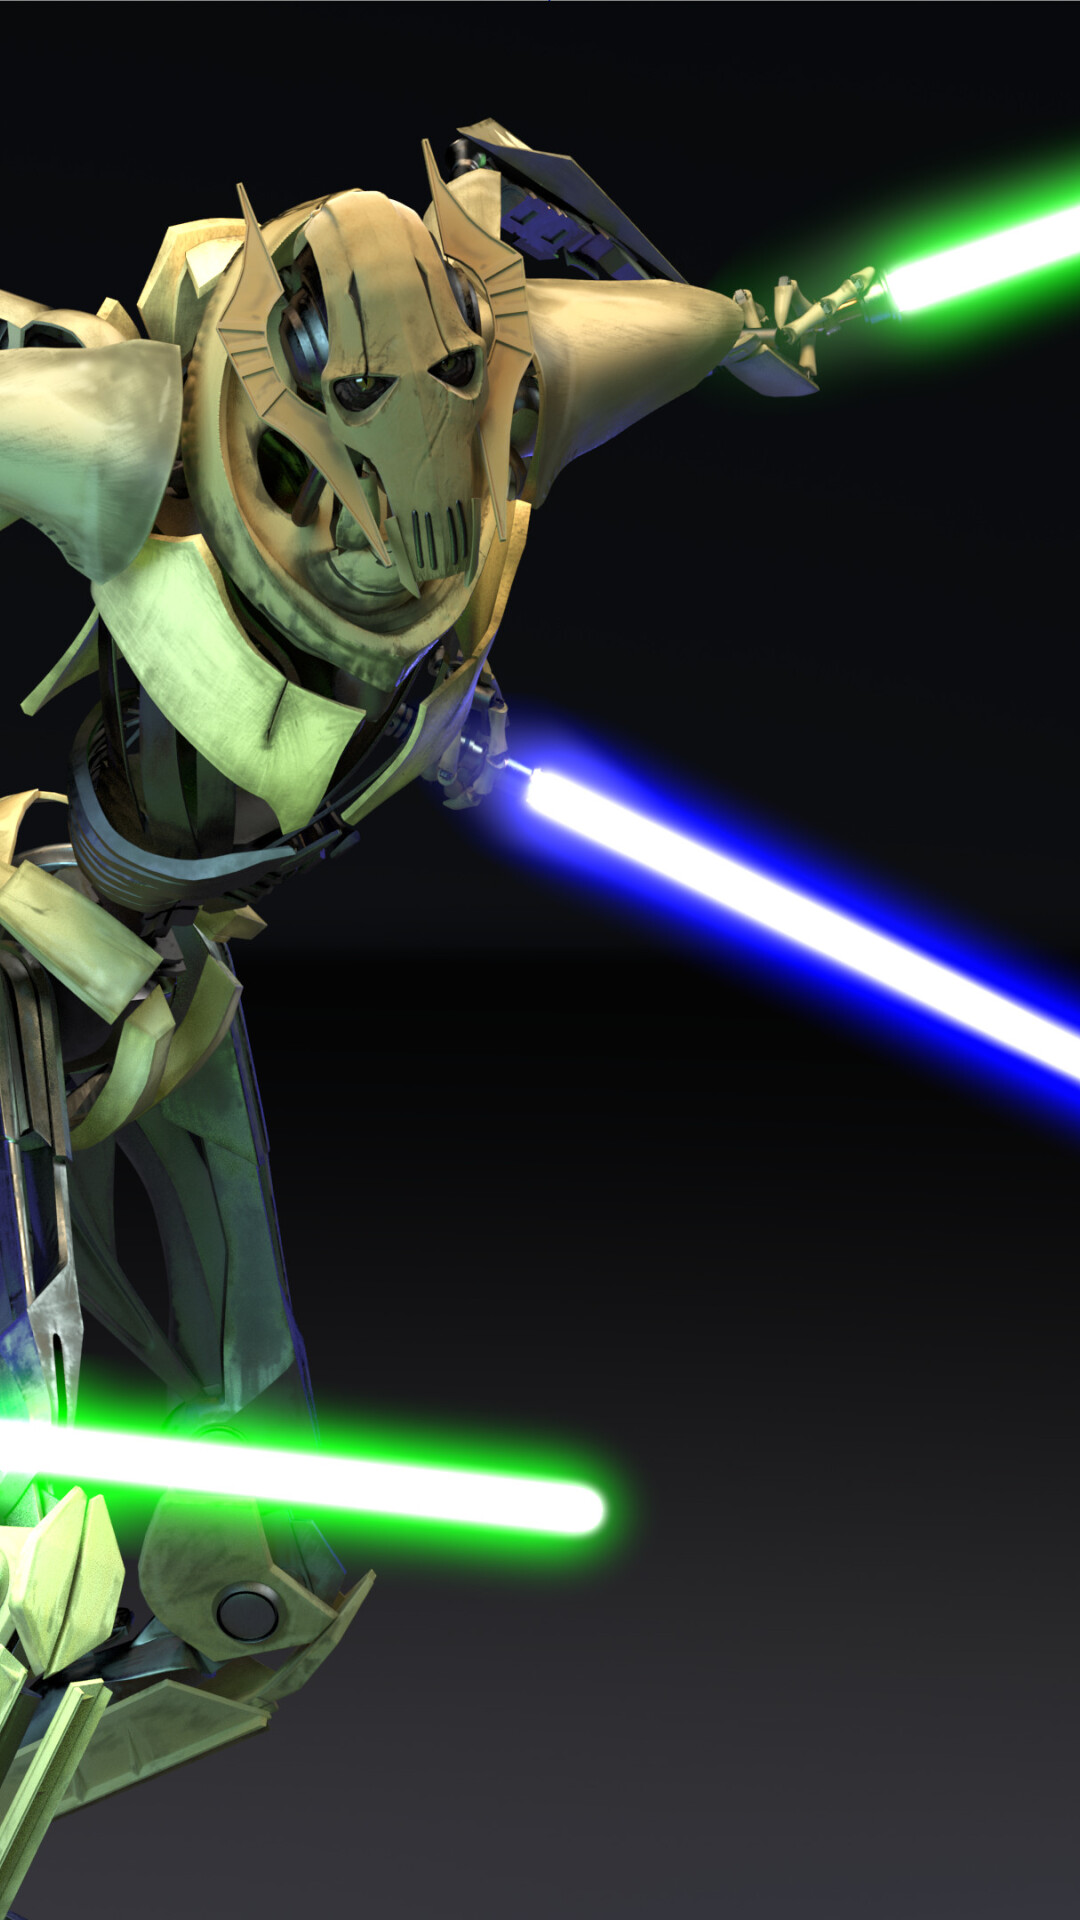 General Grievous: The most dangerous lightsaber duelists, Four sabers, The trophies representing all the Jedi and Padawans he killed. 1080x1920 Full HD Wallpaper.